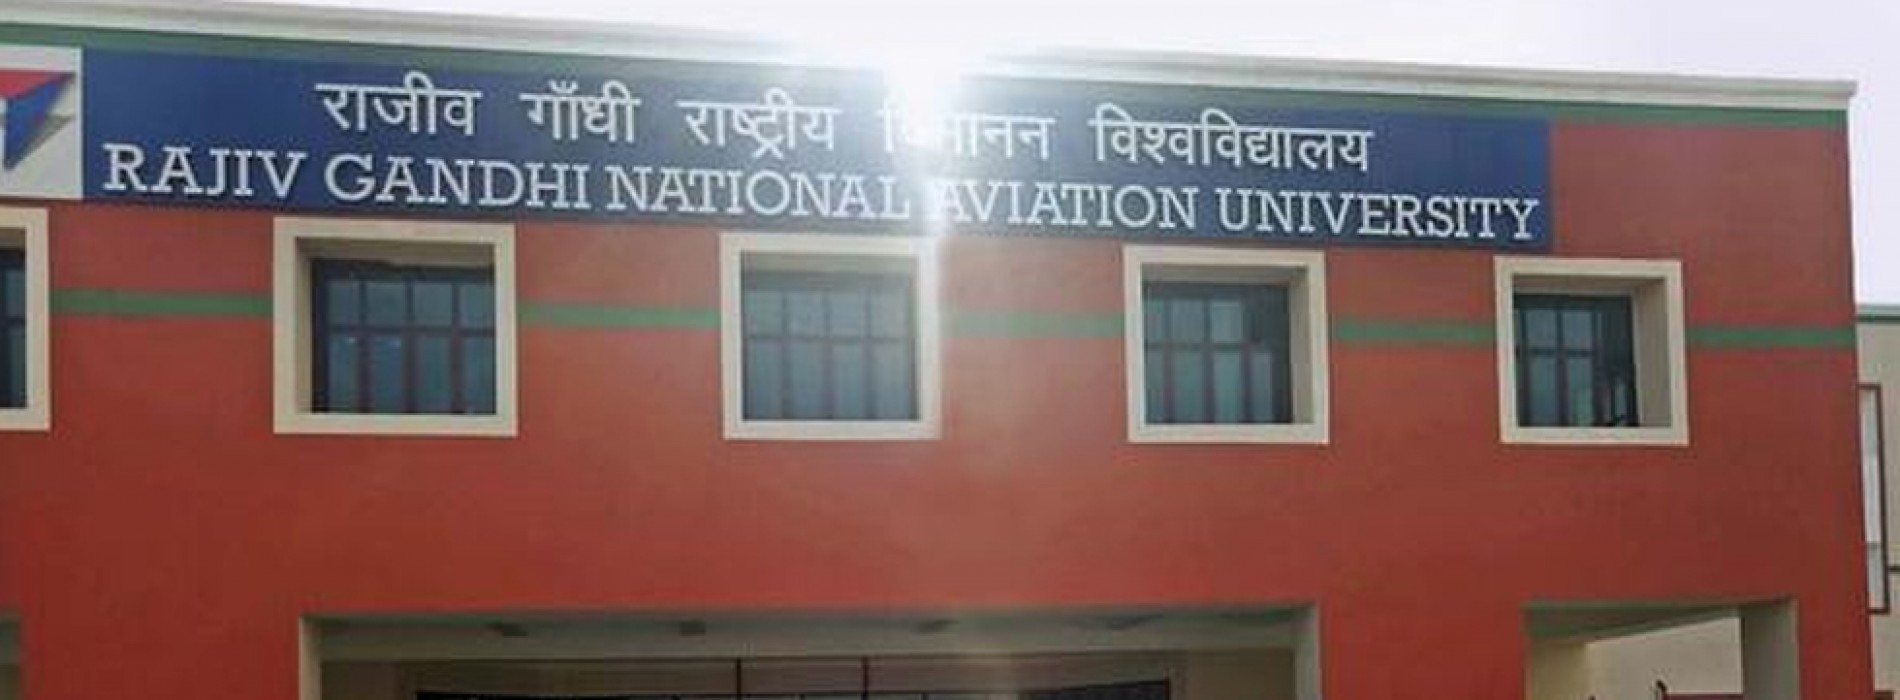 India’s first aviation university to be inaugurated on Aug 18